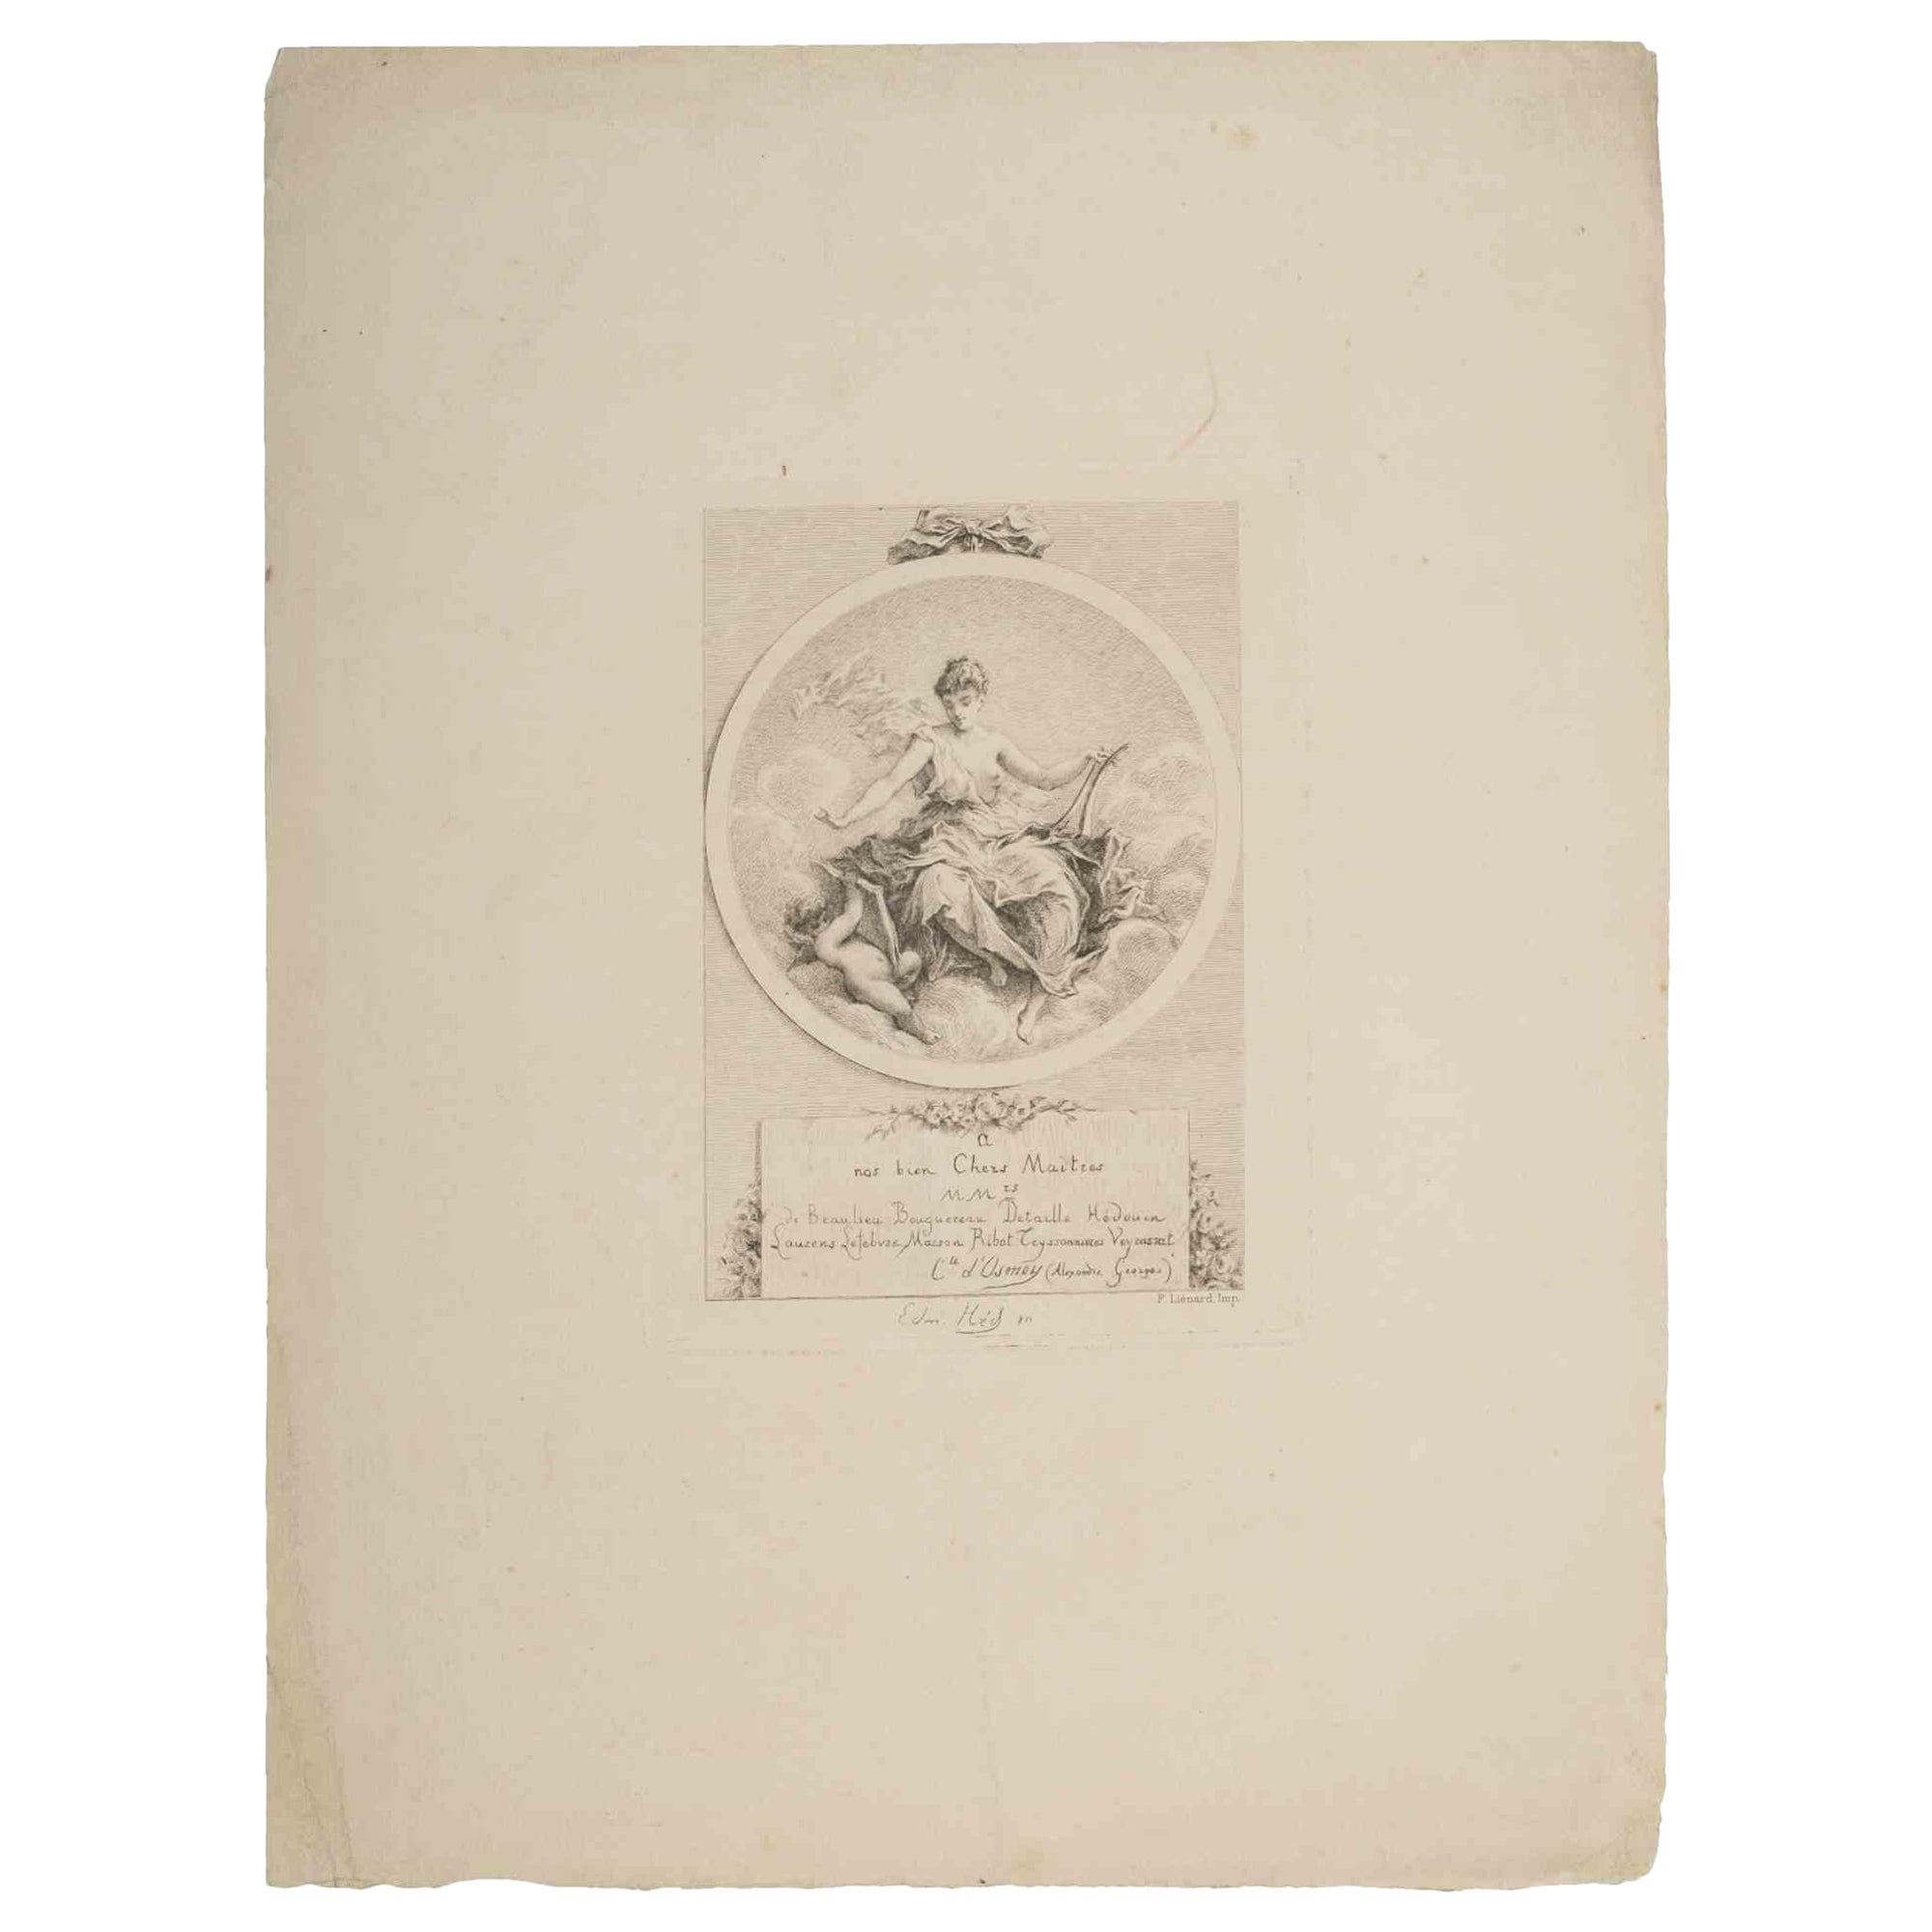 On the Cloud is an original etching artwork realized by Edmond Hedouin (1820-1889) in the late 19th Century. 

Good conditions.

Signed on the Plate.

The artwork represented a delicate beautiful expression through fine and deft strokes.